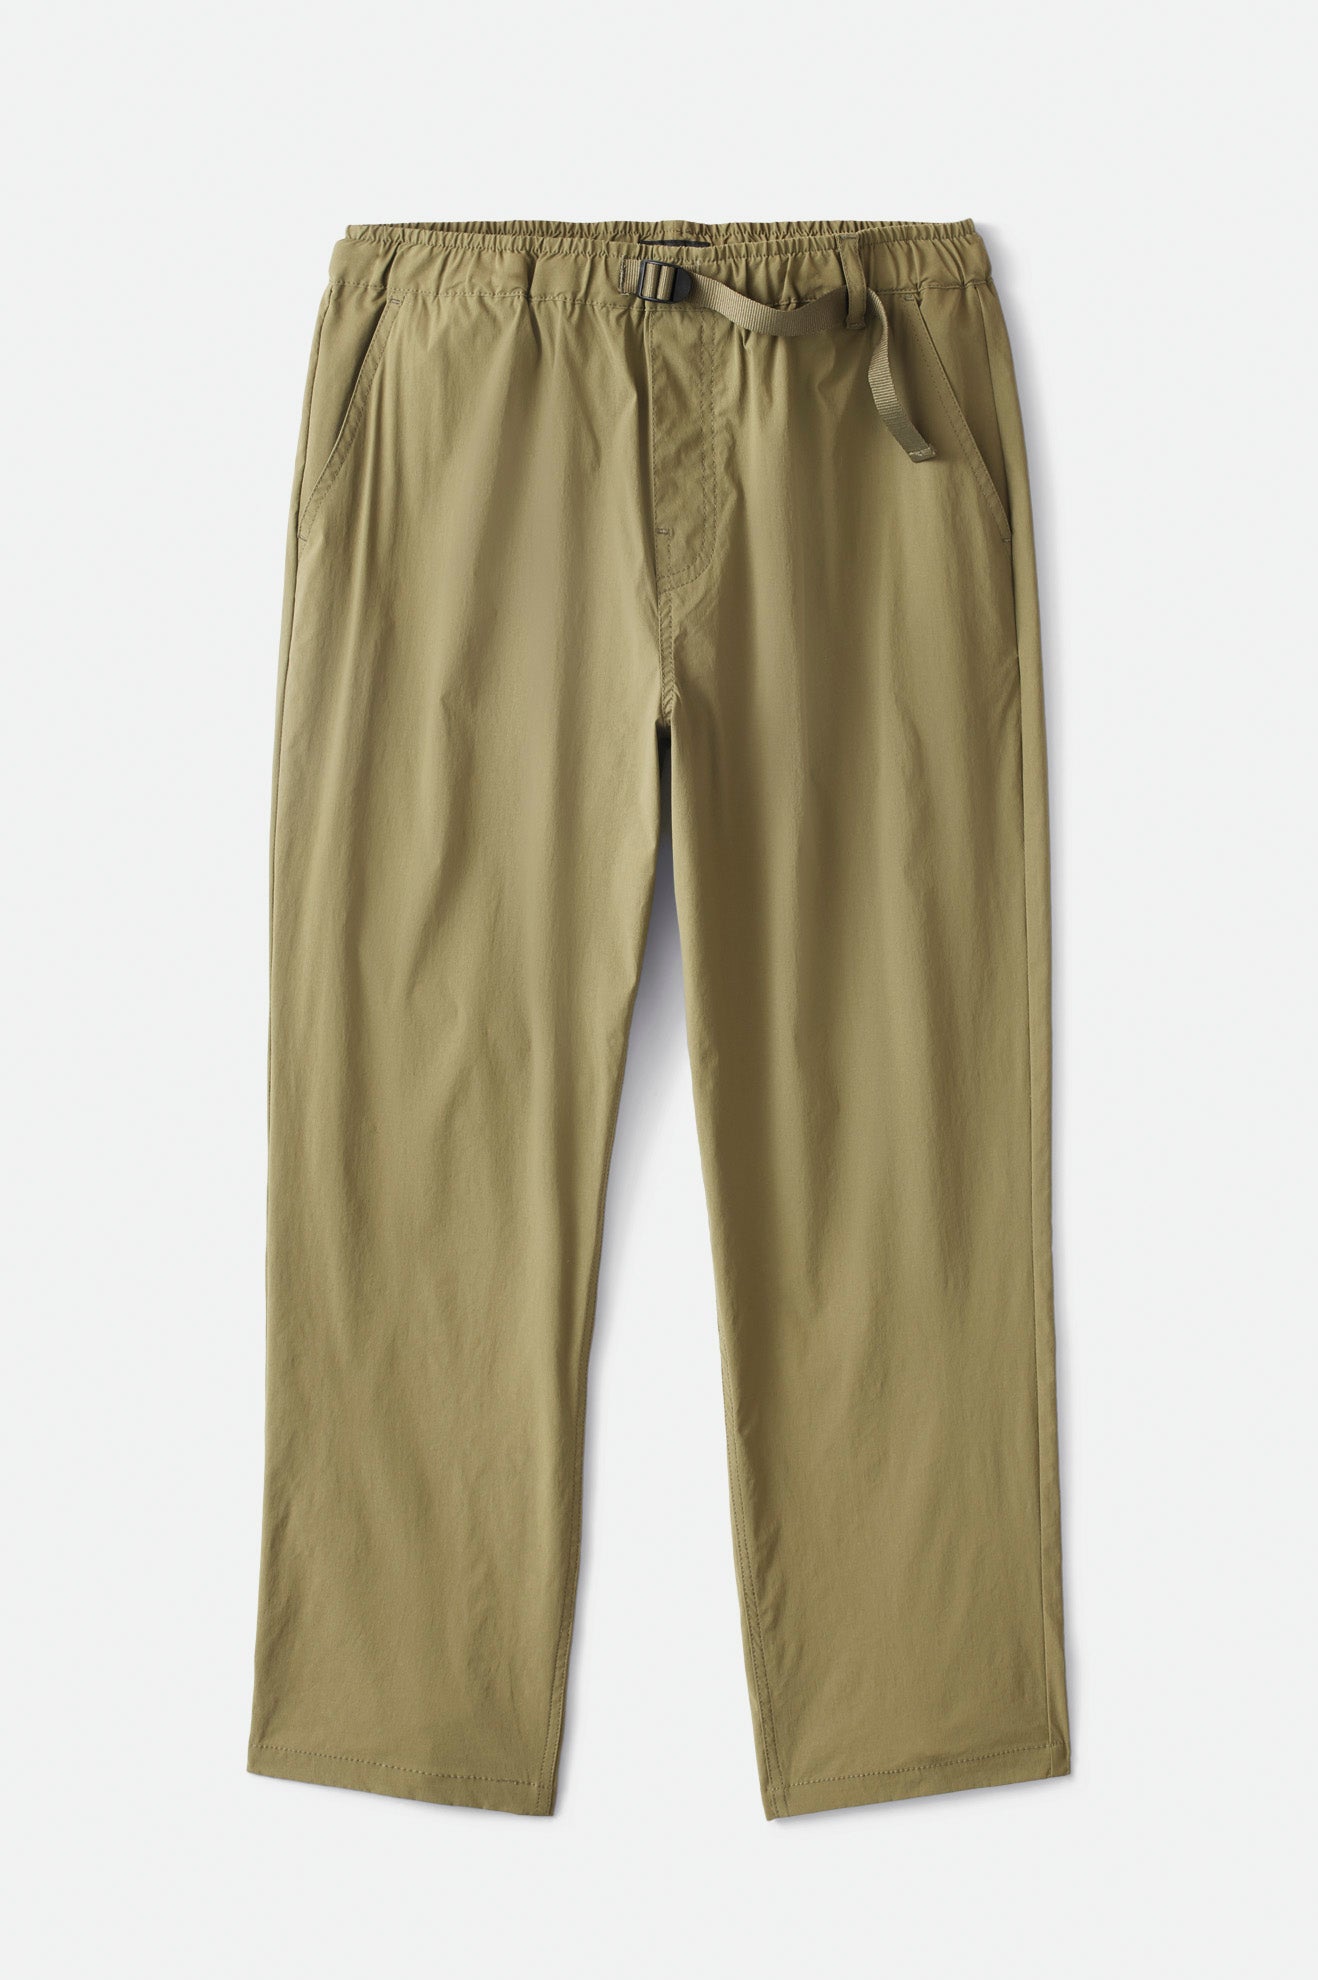 Steady Cinch Taper Utility Pant - Military Olive